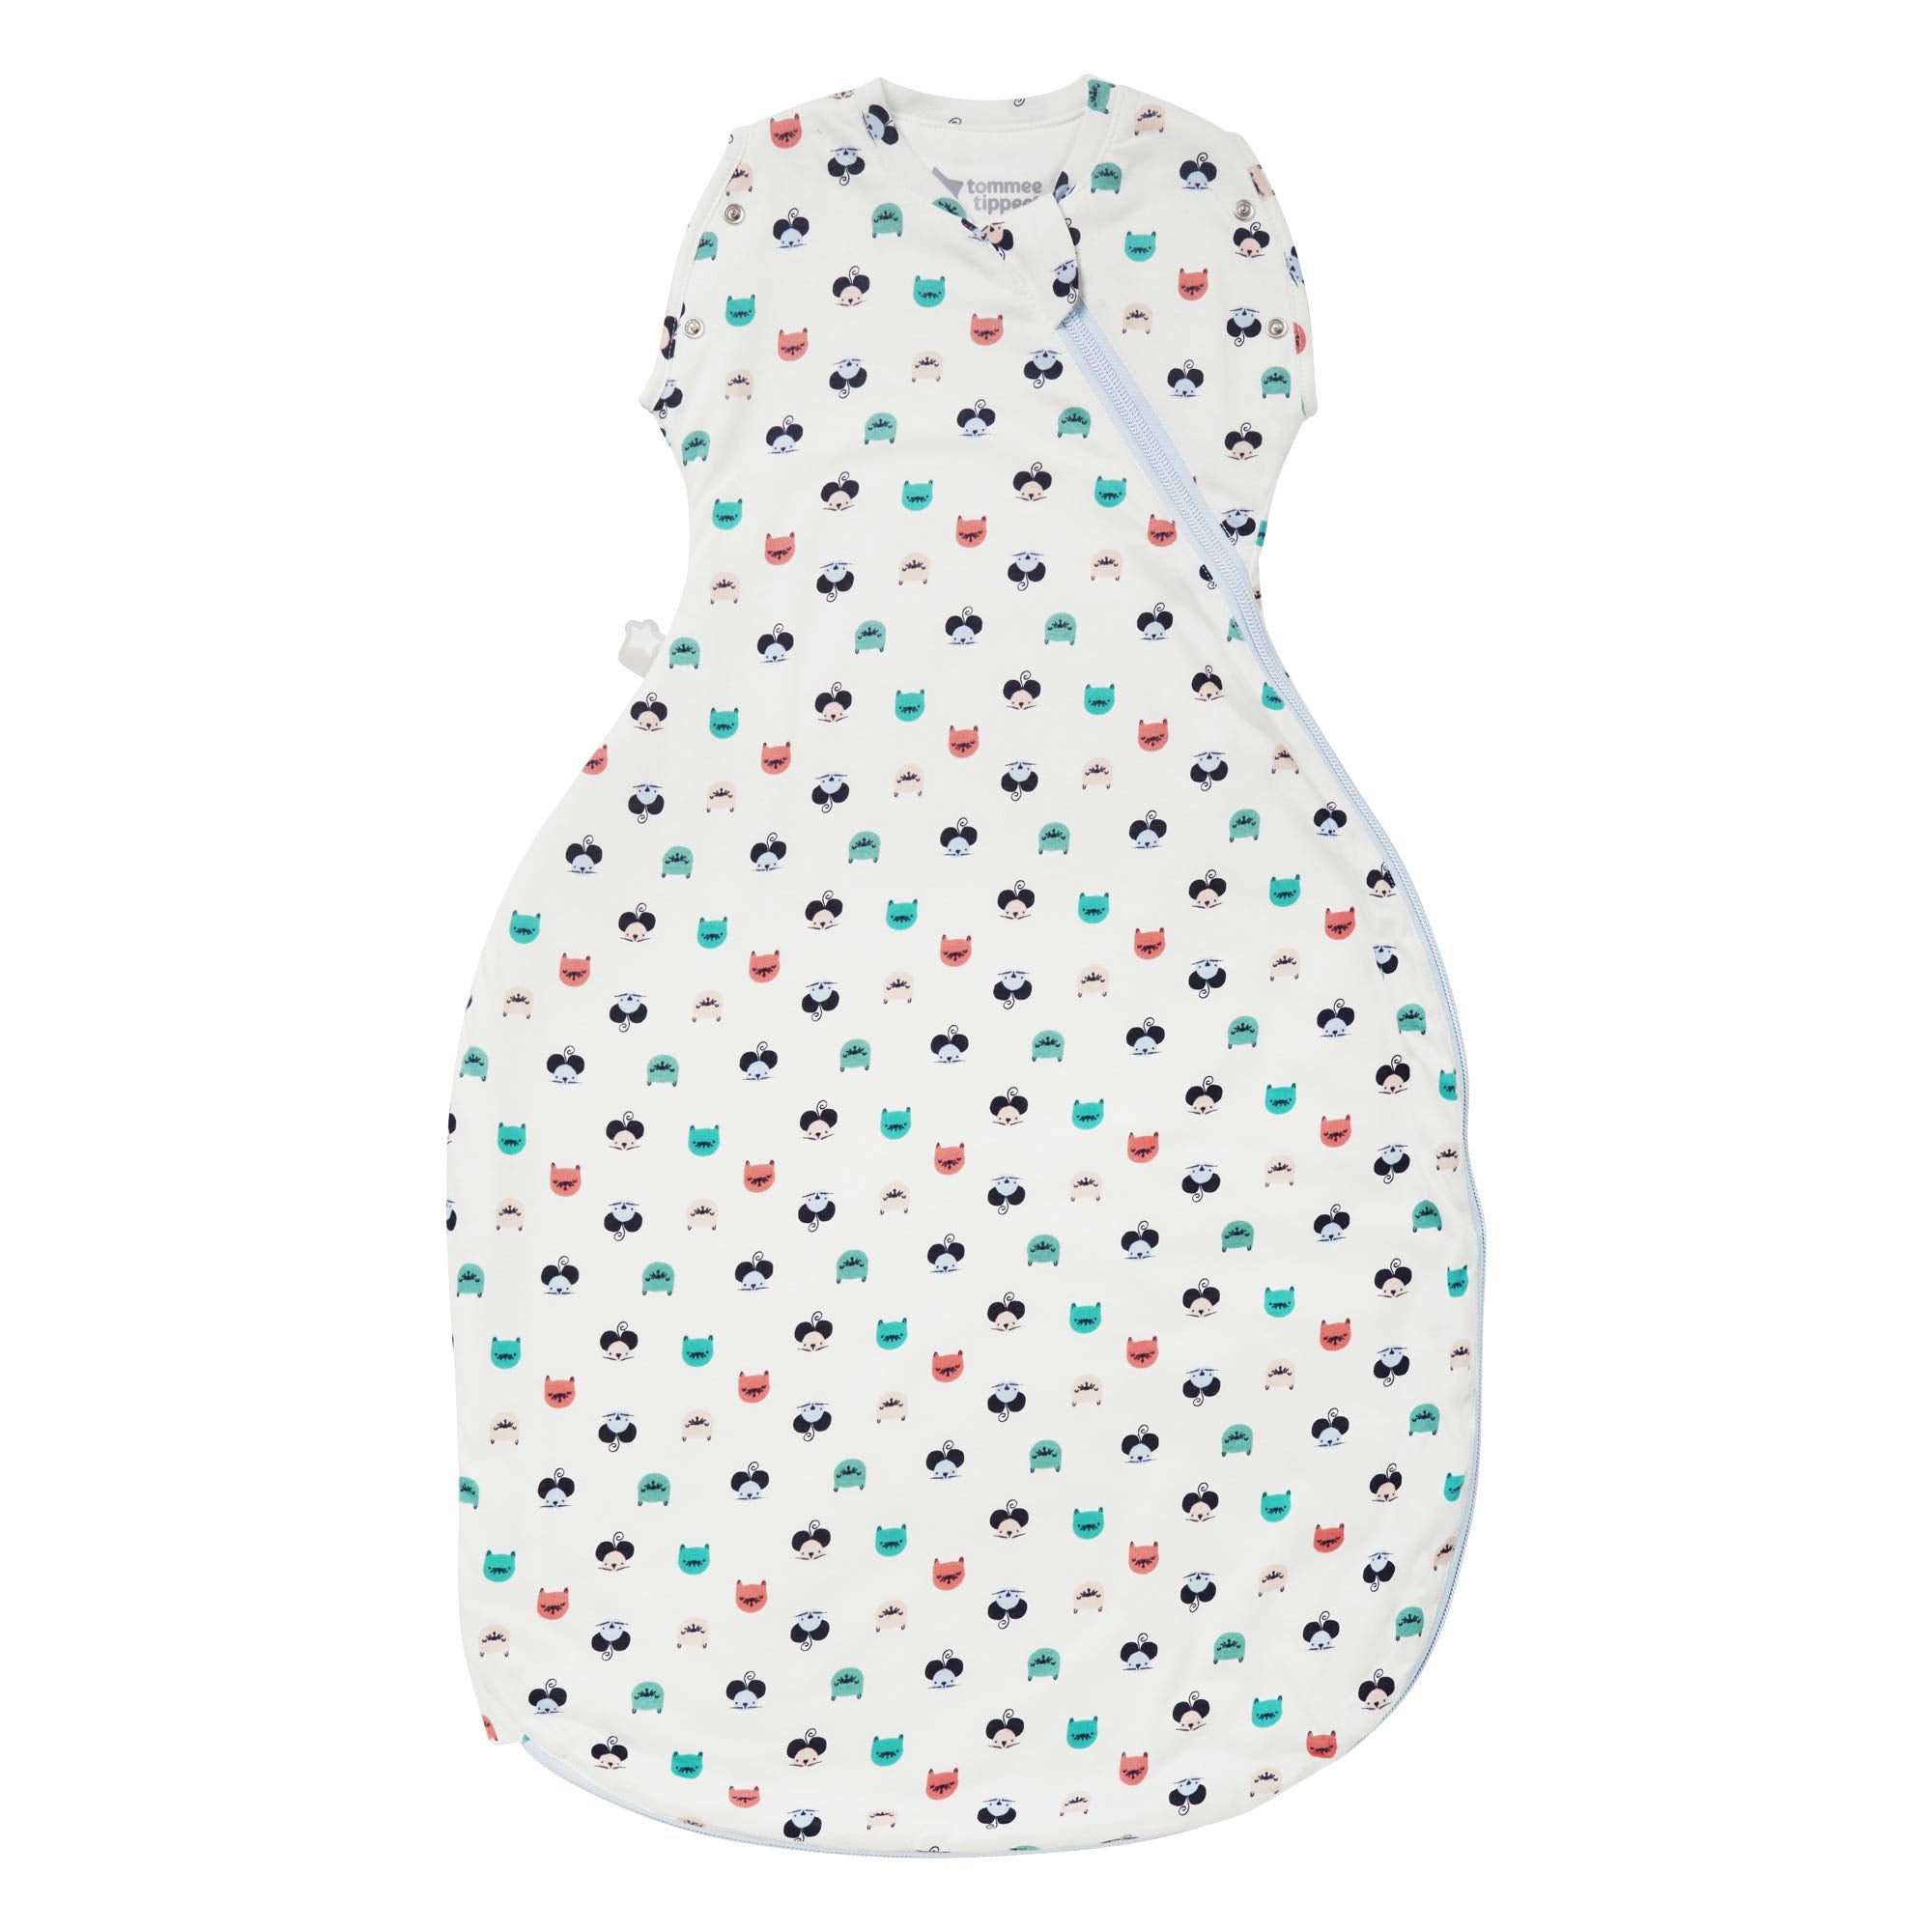 Tommee Tippee Baby Sleep Bag, The Original Grobag Snuggle, Soft Cotton-Rich Fabric, 3-9m, 1.0 Tog, Cat and Mouse